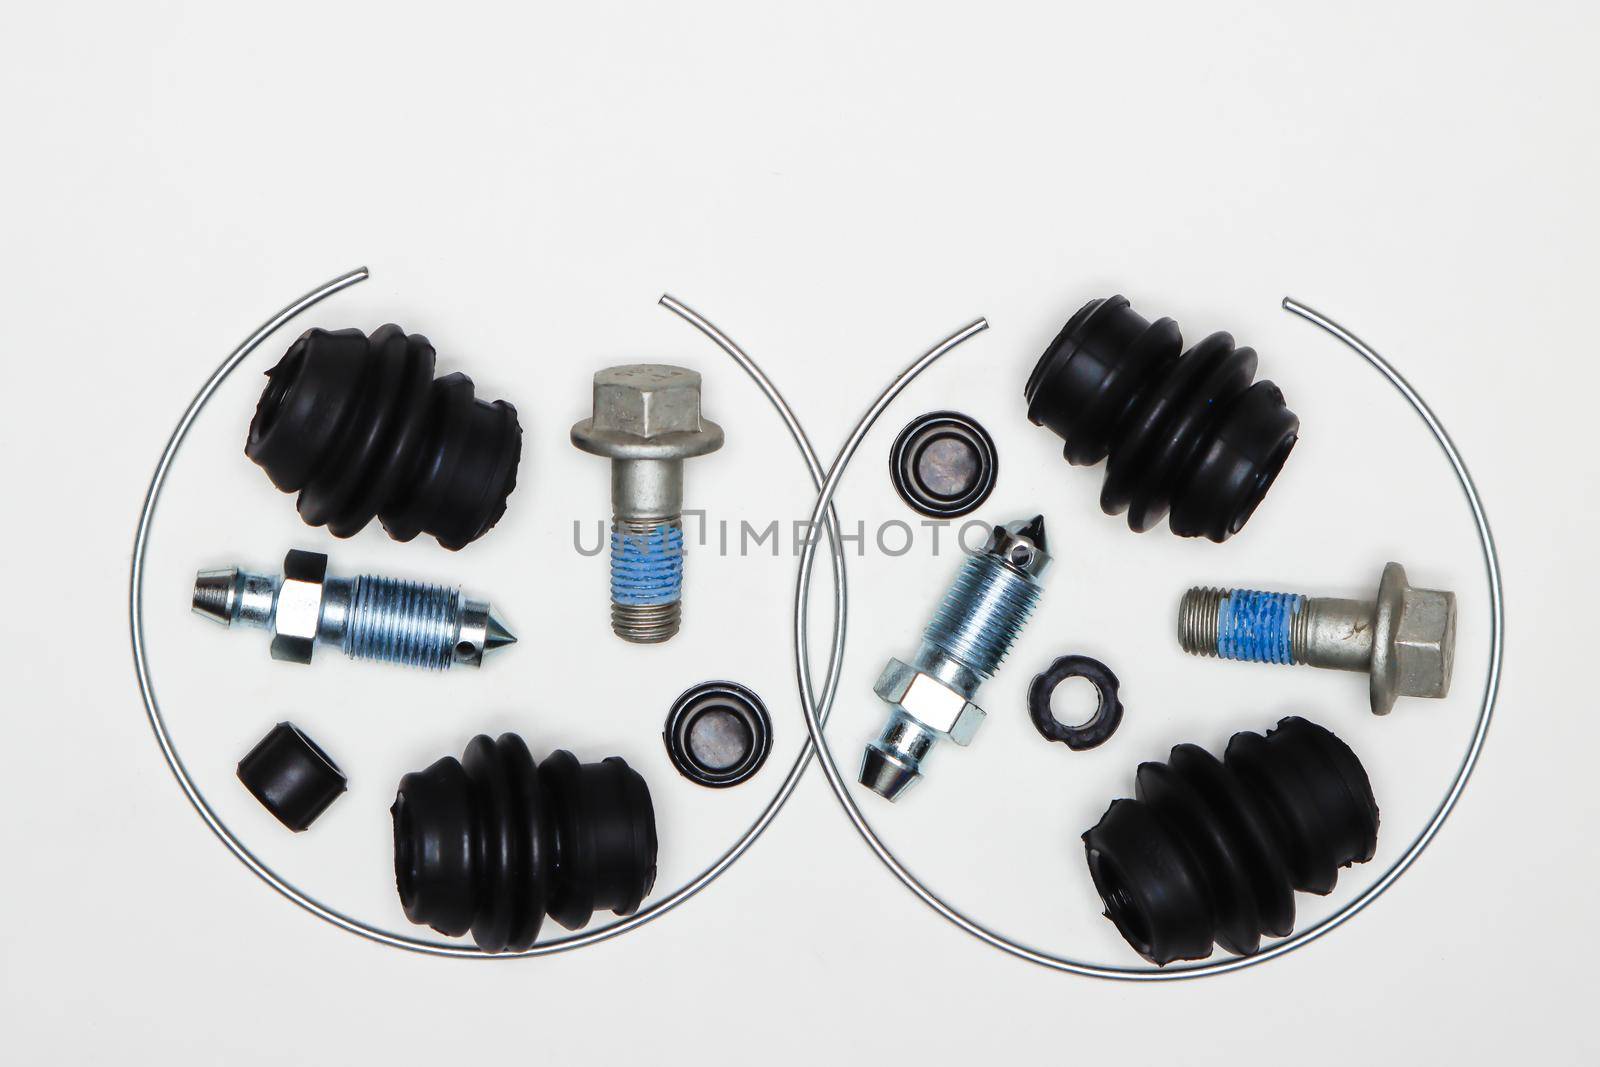 Caliper repair kit, metal retaining rings, union and bolts, rubber seals. Set of spare parts for car brake repair. Details on white background, copy space available. UHD 4K.